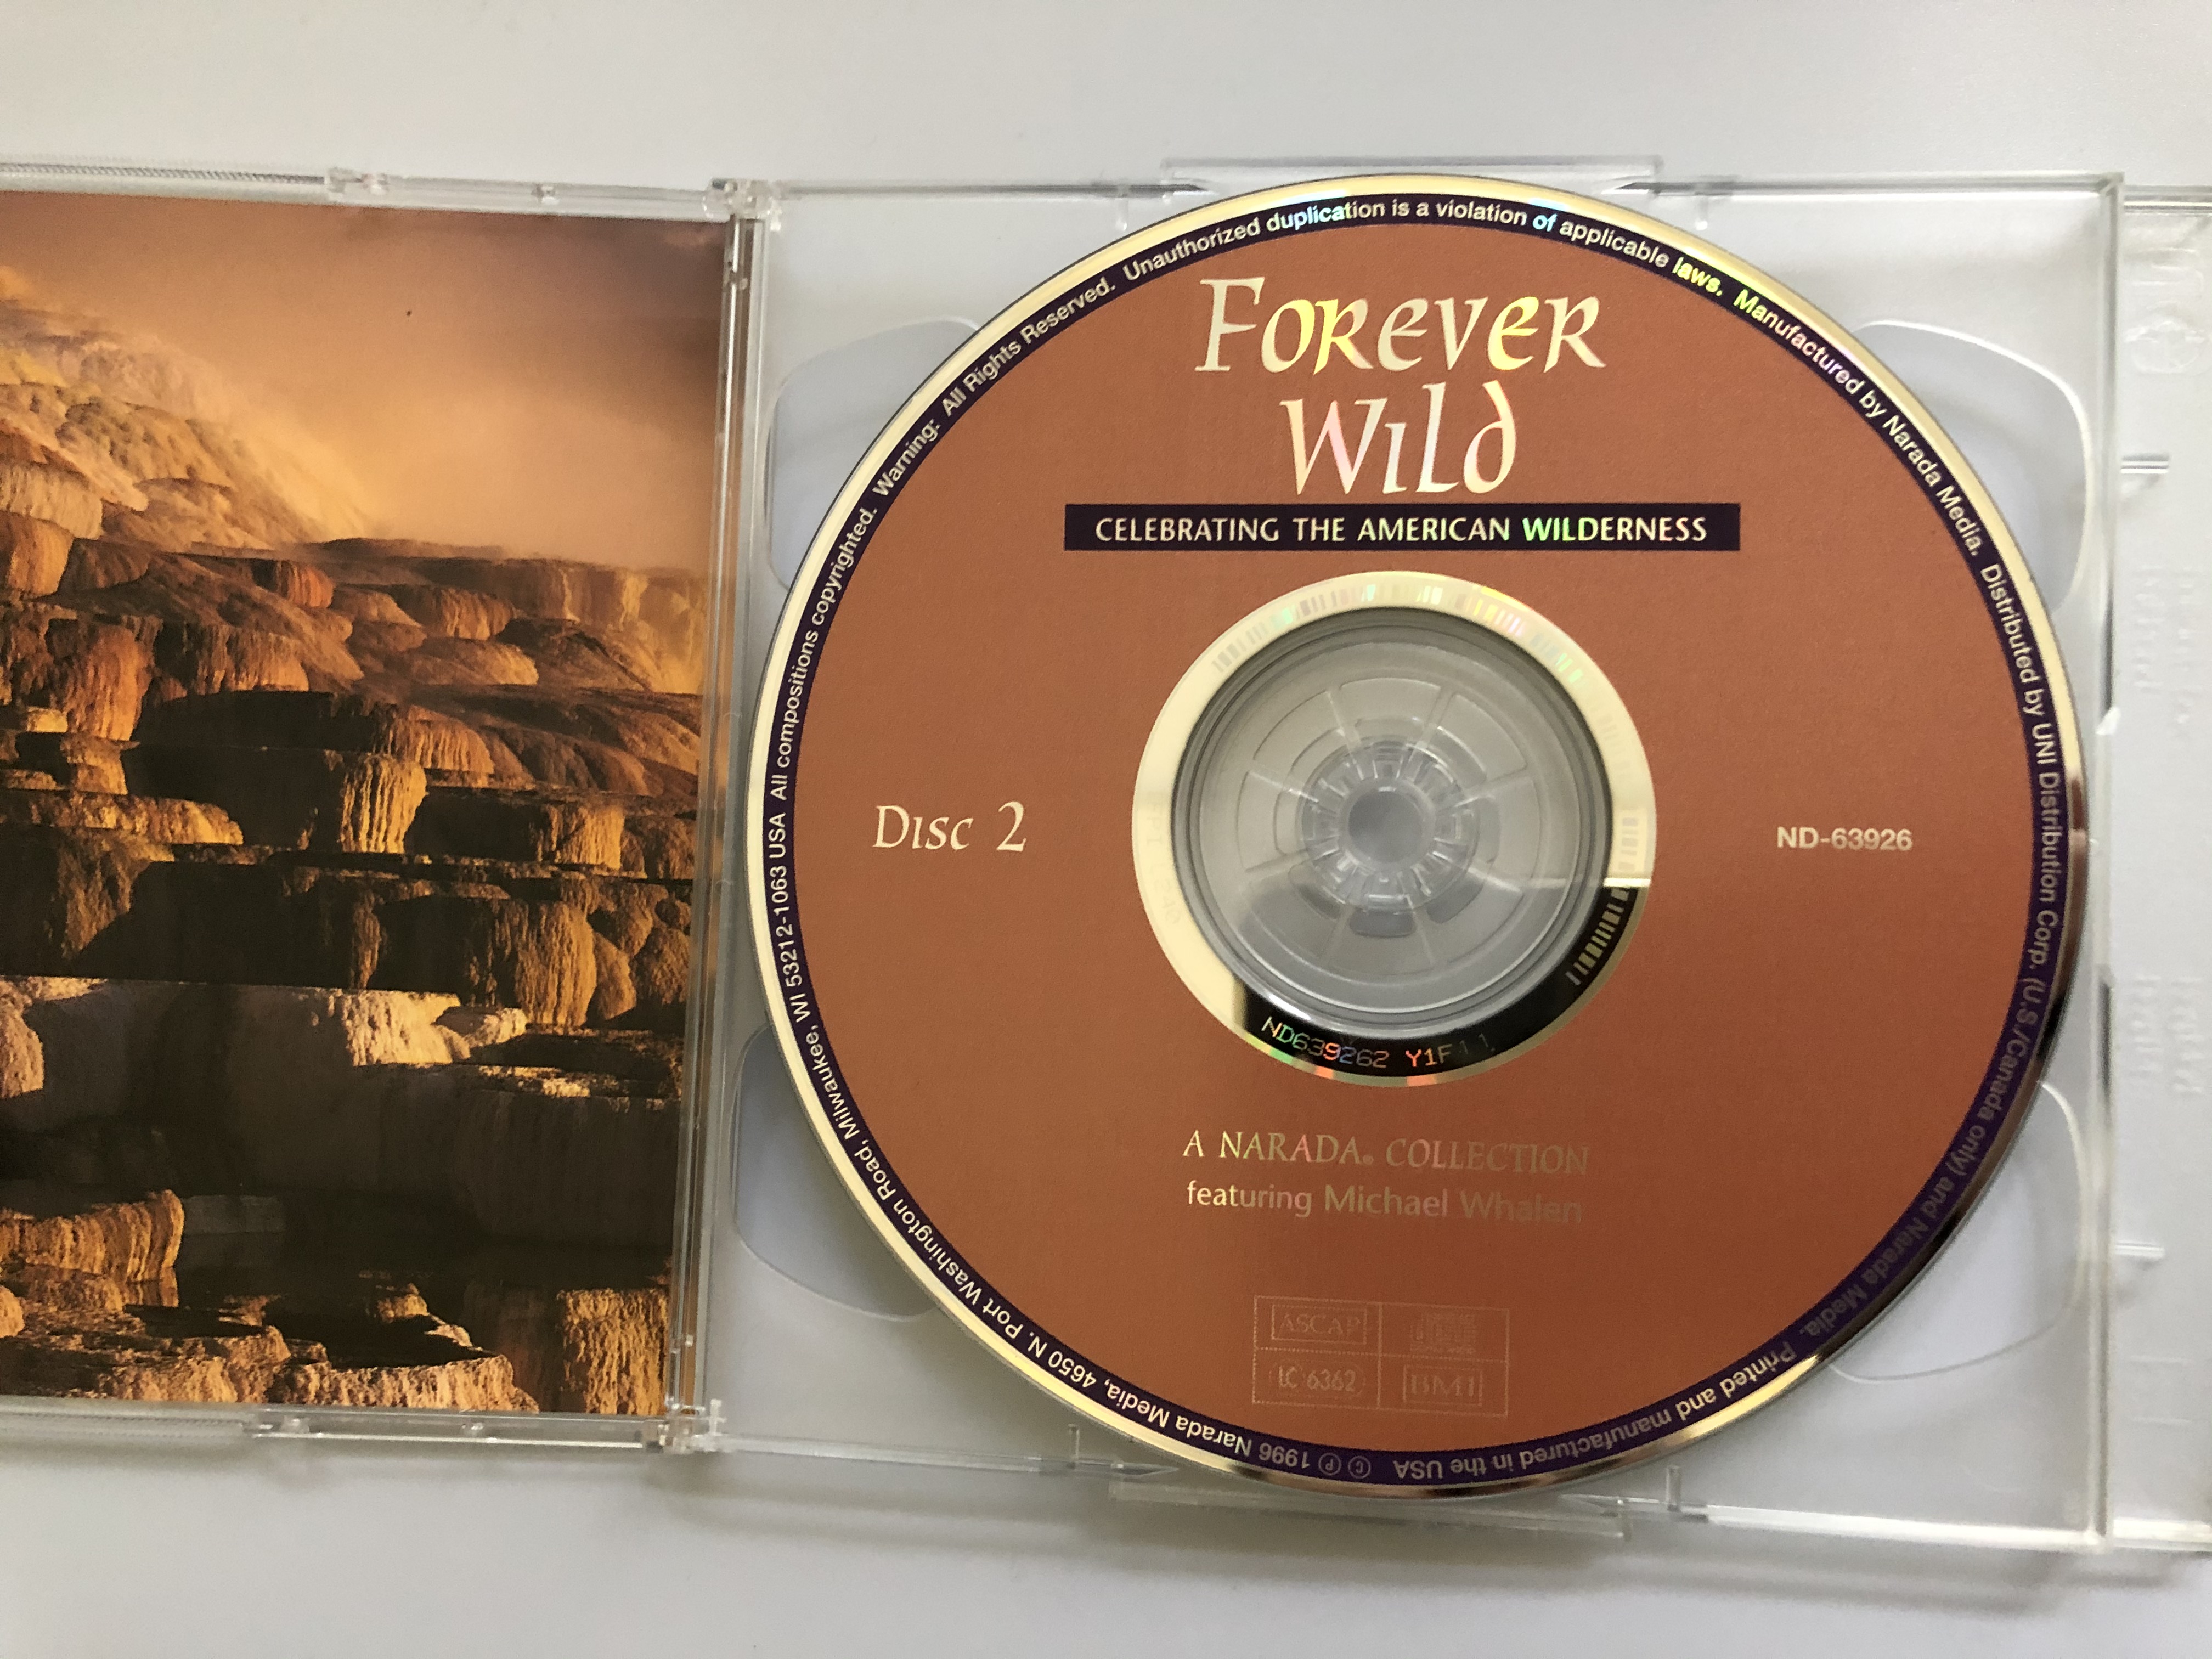 forever-wild-celebrating-the-american-wilderness-a-narada-collection-featuring-michael-whalen-narada-2x-audio-cd-1996-nd-63926-4-.jpg